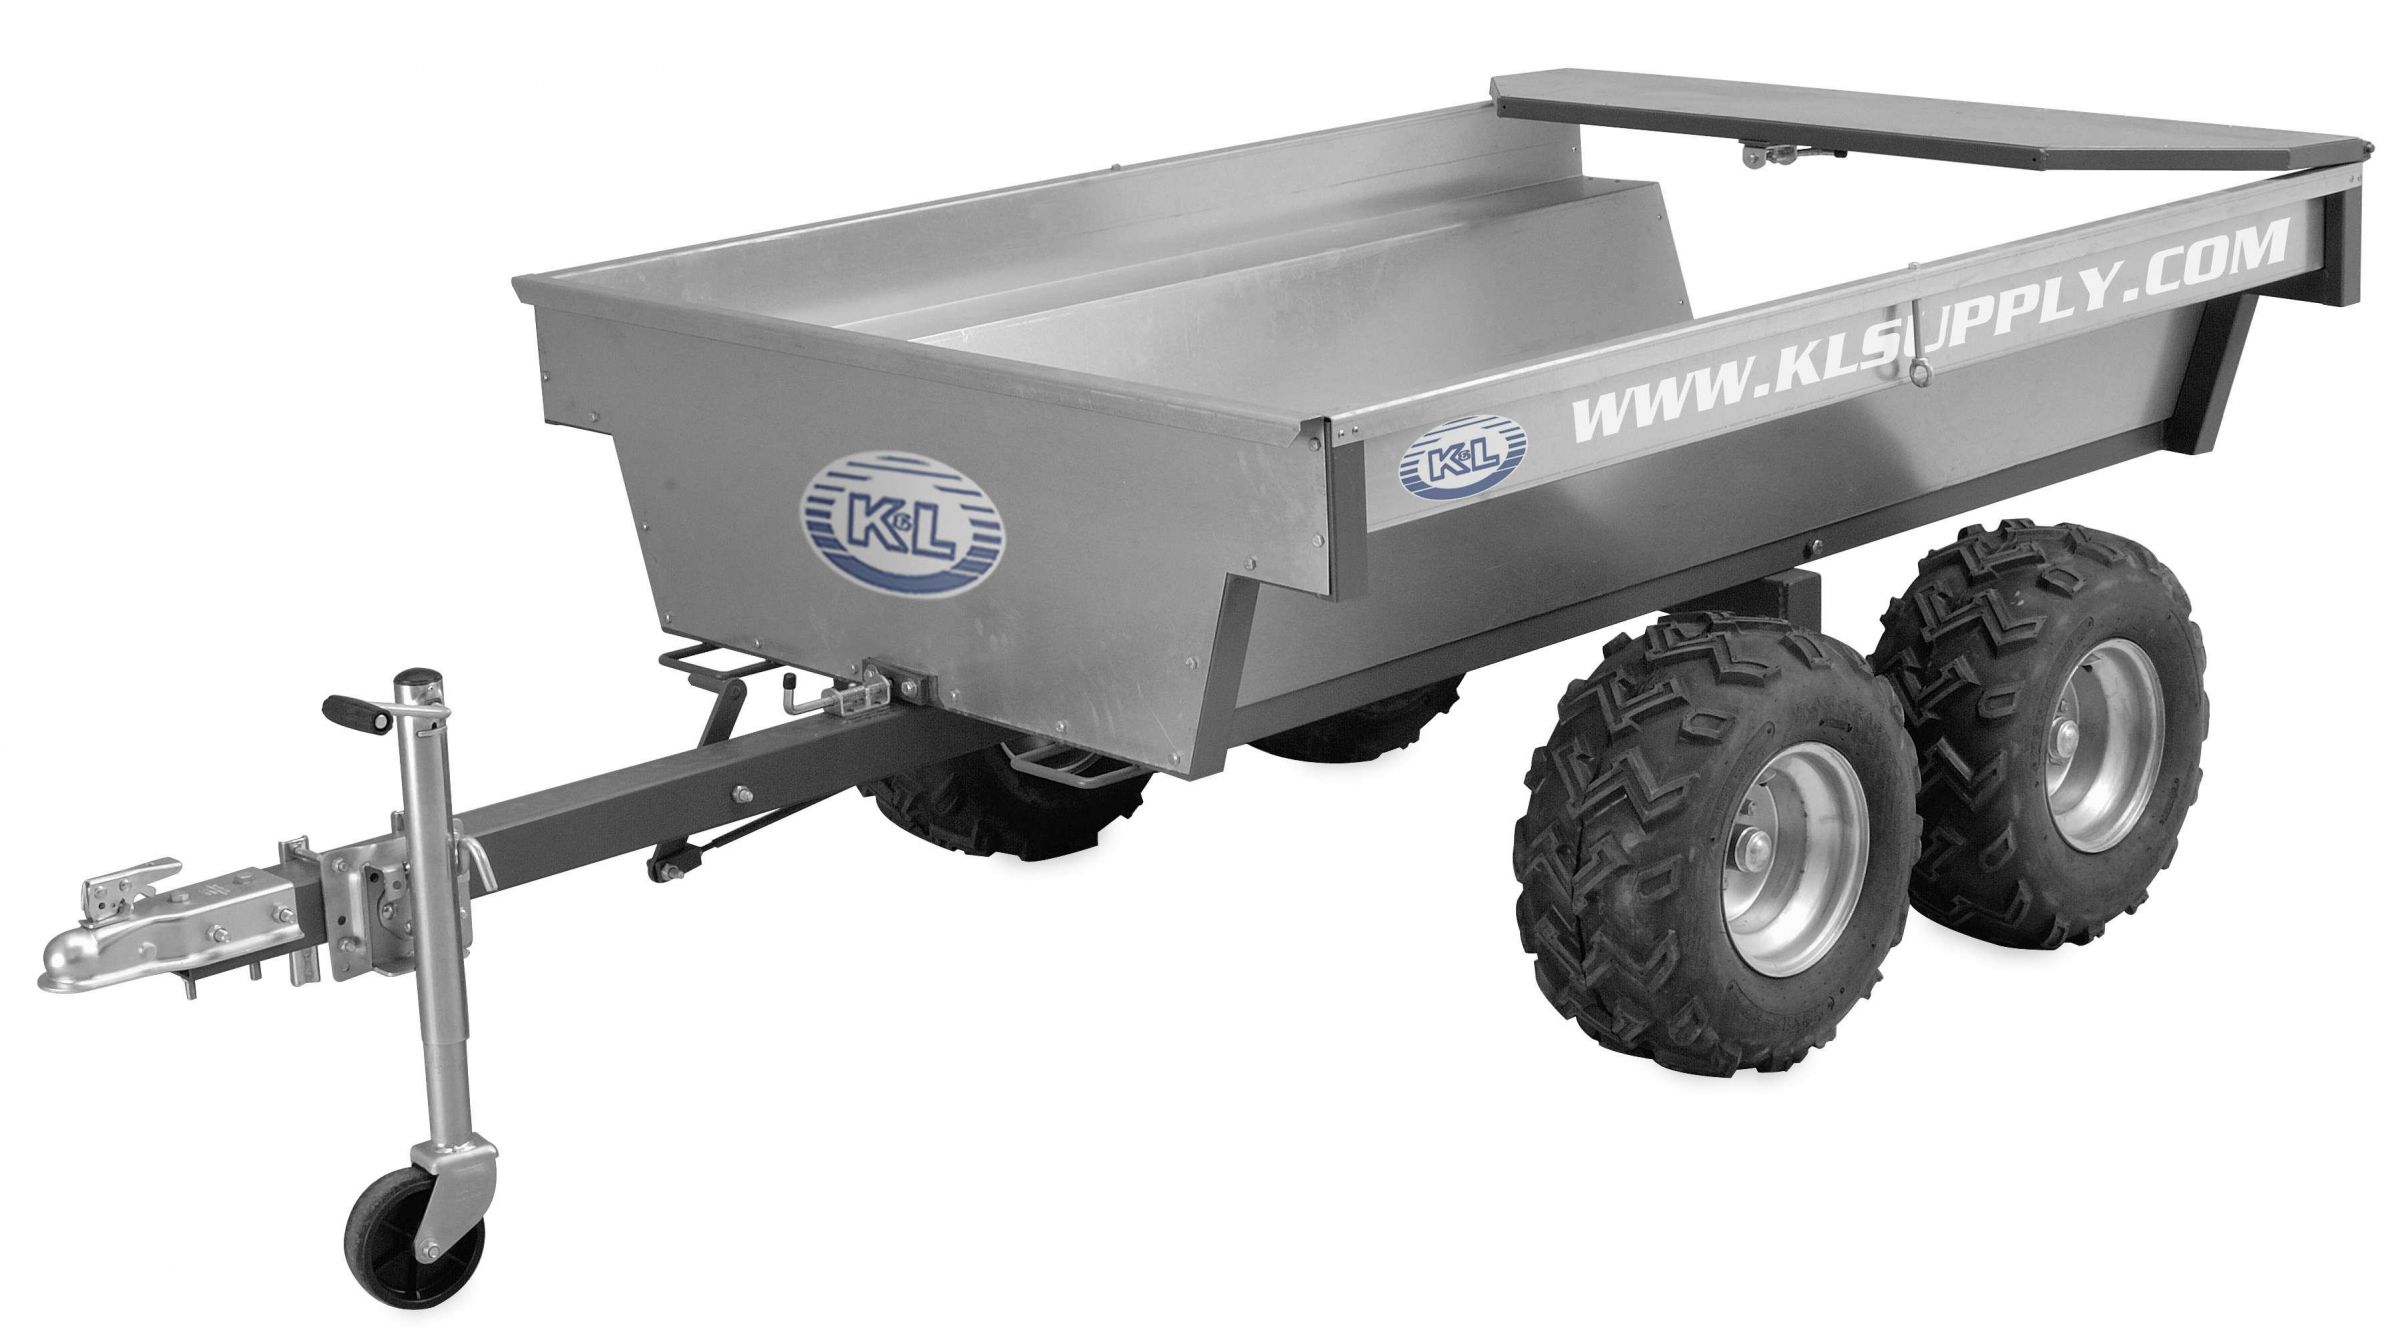 45WP-K-L-SUPPLY-35-6690 Wide Utility Trailer